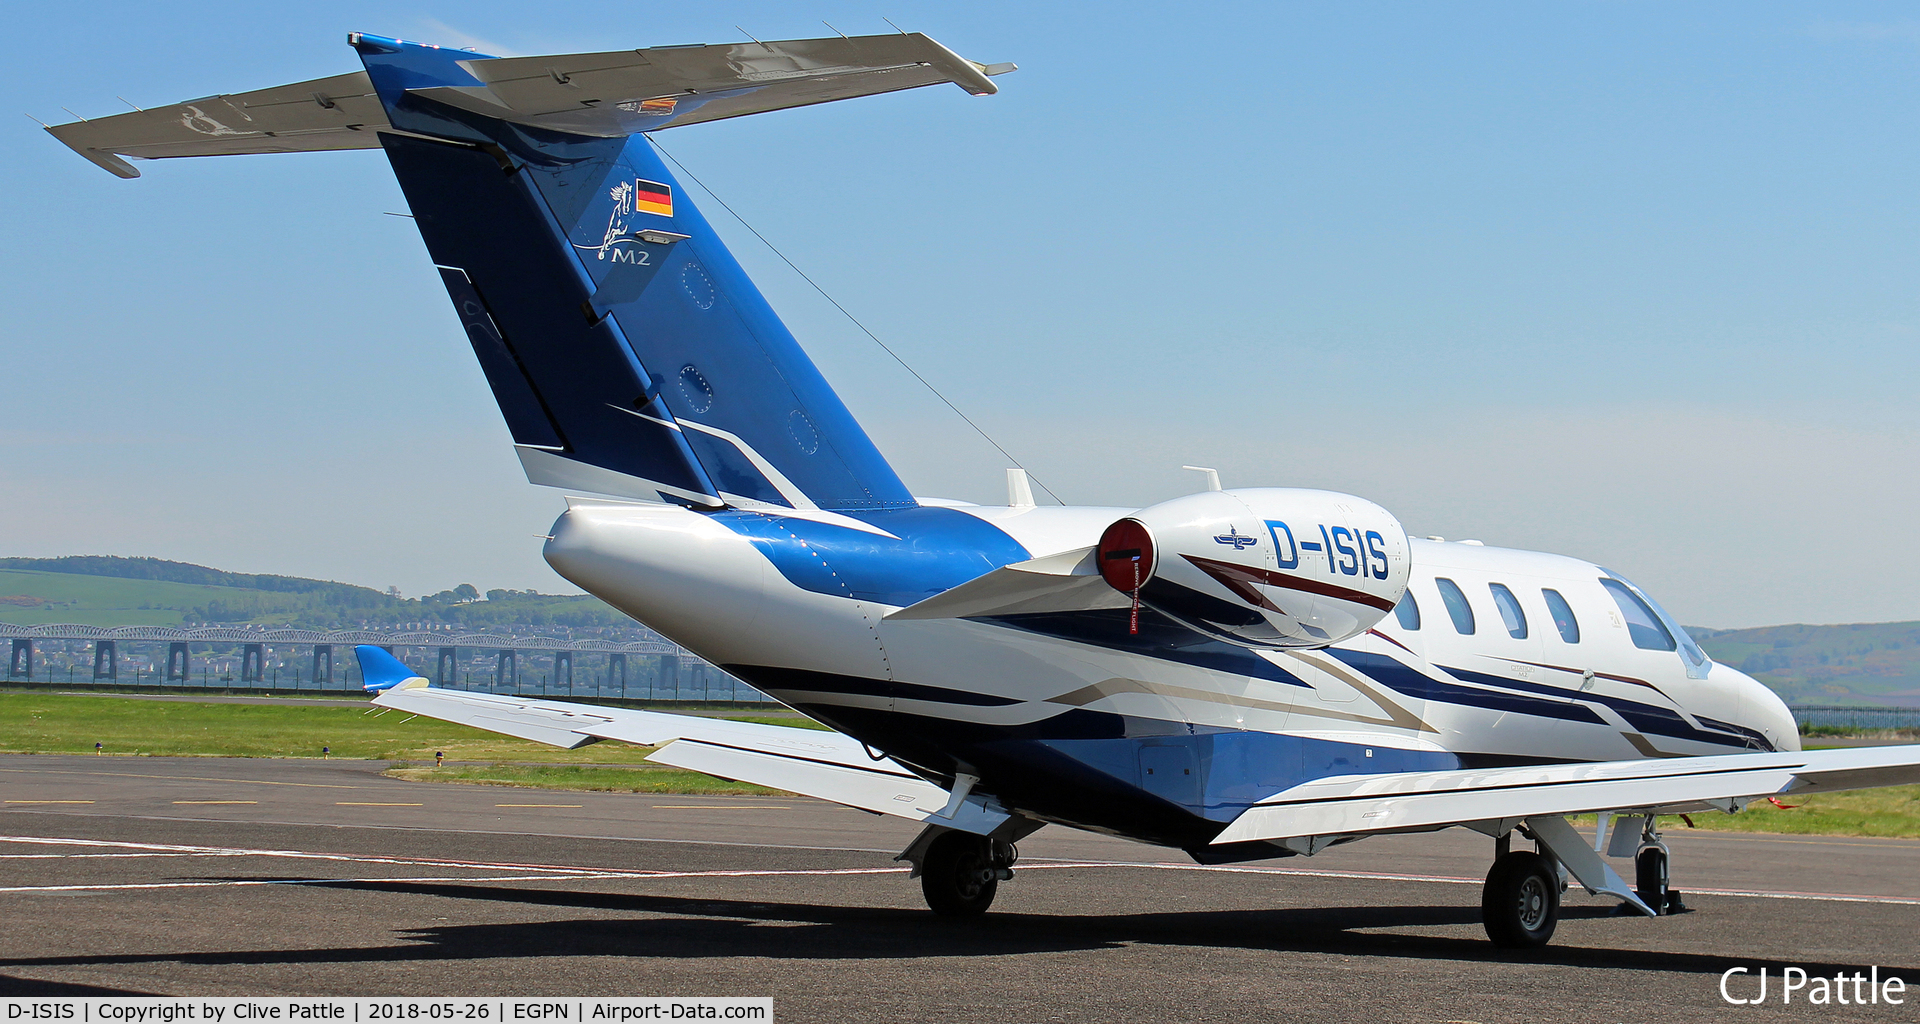 D-ISIS, 2014 Cessna 525 Citation M2 C/N 525-0820, Visiting Dundee